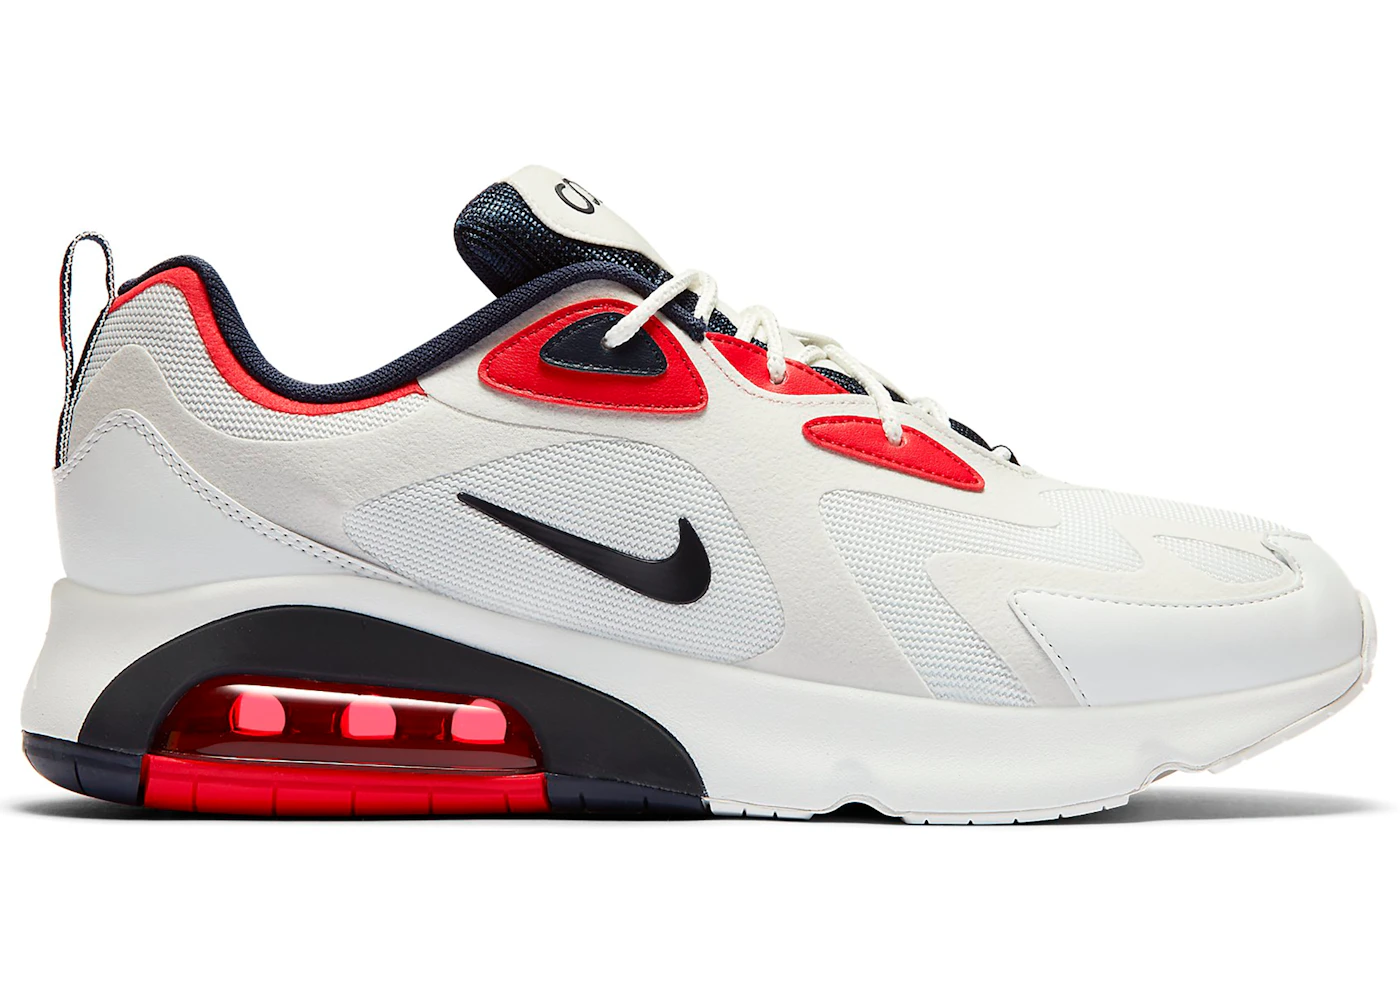 Nike Air Max 200 White Red Obsidian - CT1262-101